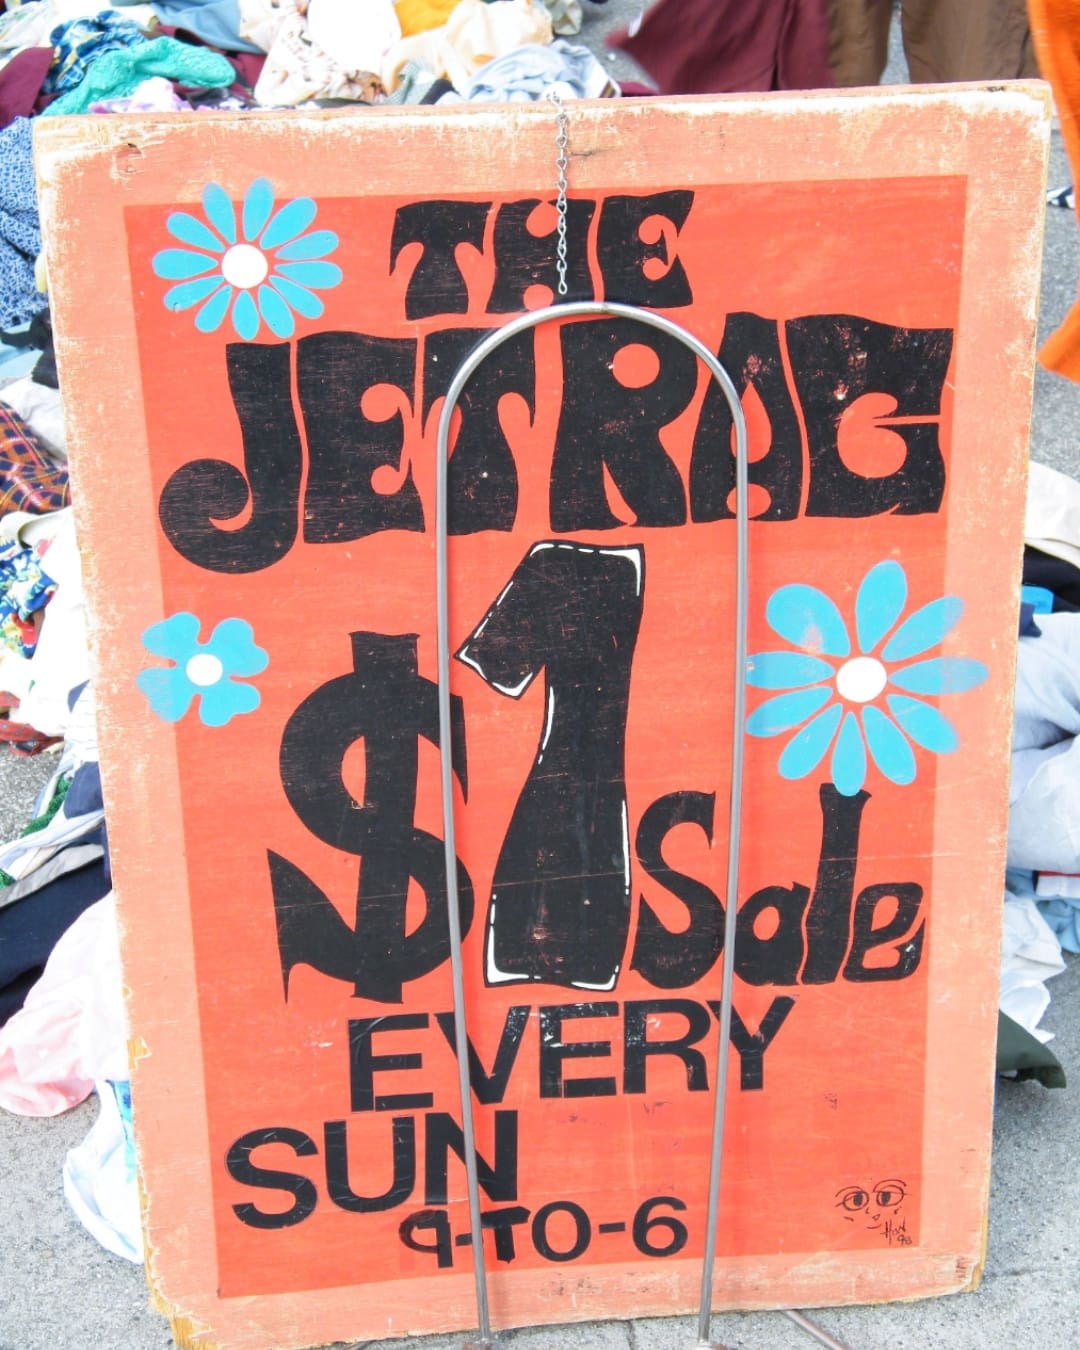 The best vintage stores in LA | a sign for the Jetrag $1 sale